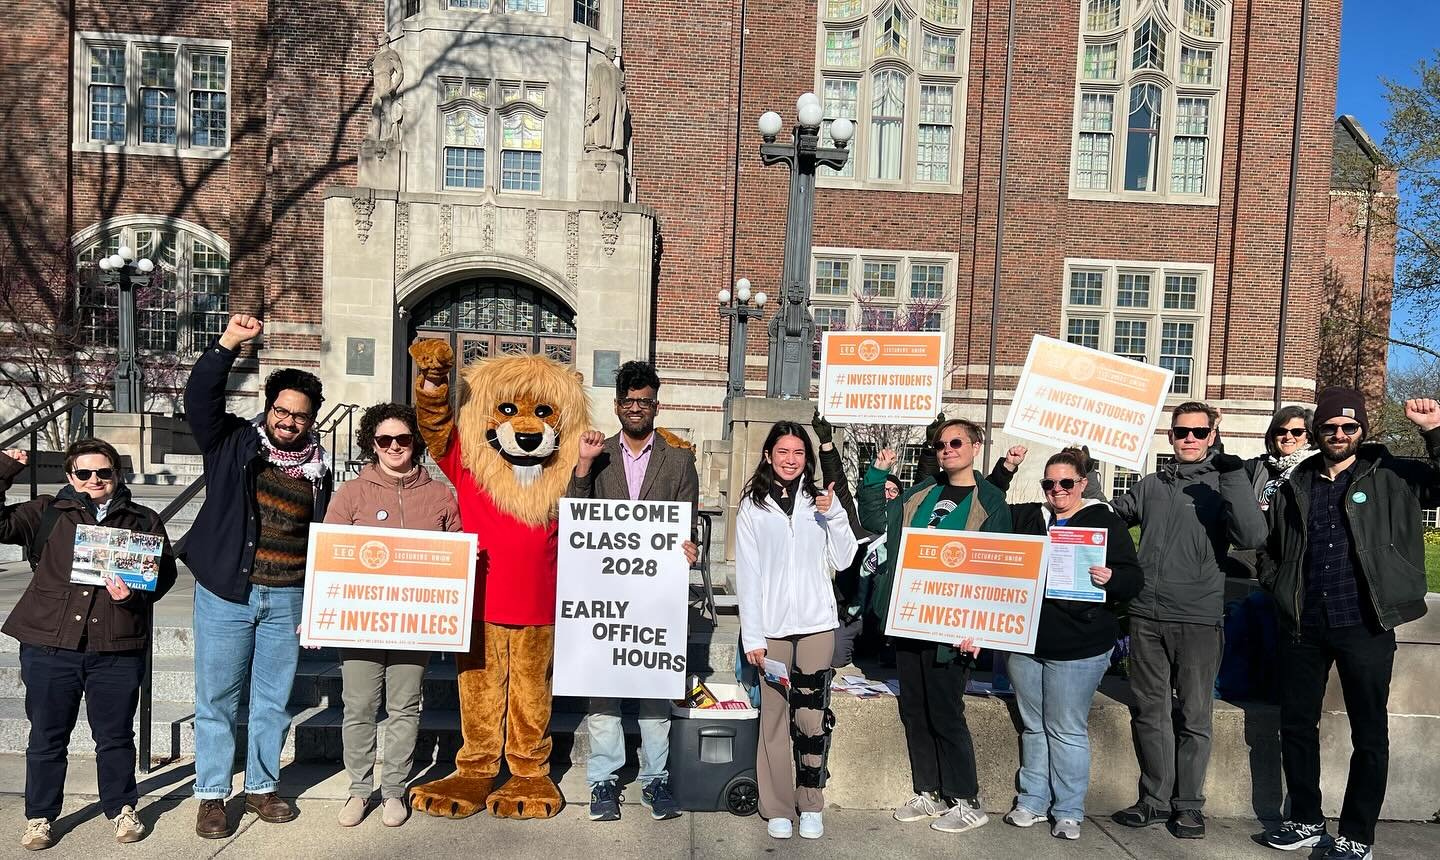 LEOs and allies got some practice picketing during the Campus Days event for accepted students and parents today! Lecturers are carefully considering a potential strike due to the lack of movement that we&rsquo;ve seen from admin for Flint and Dearbo